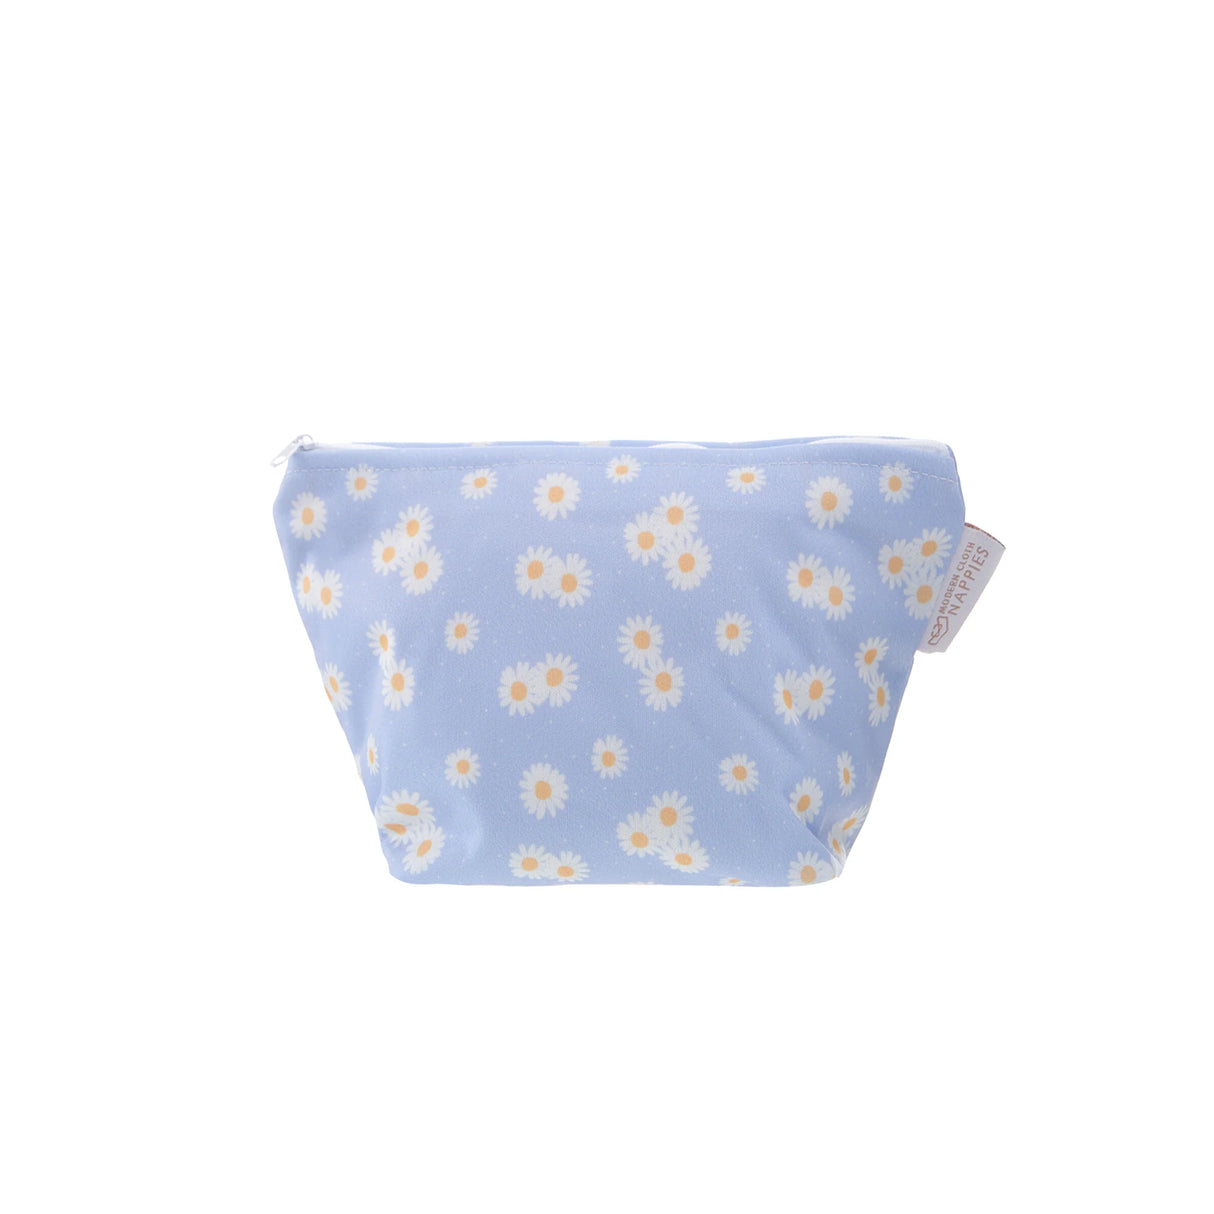 Modern Cloth Nappies - Small Wipe / Sanitary Wet Bag